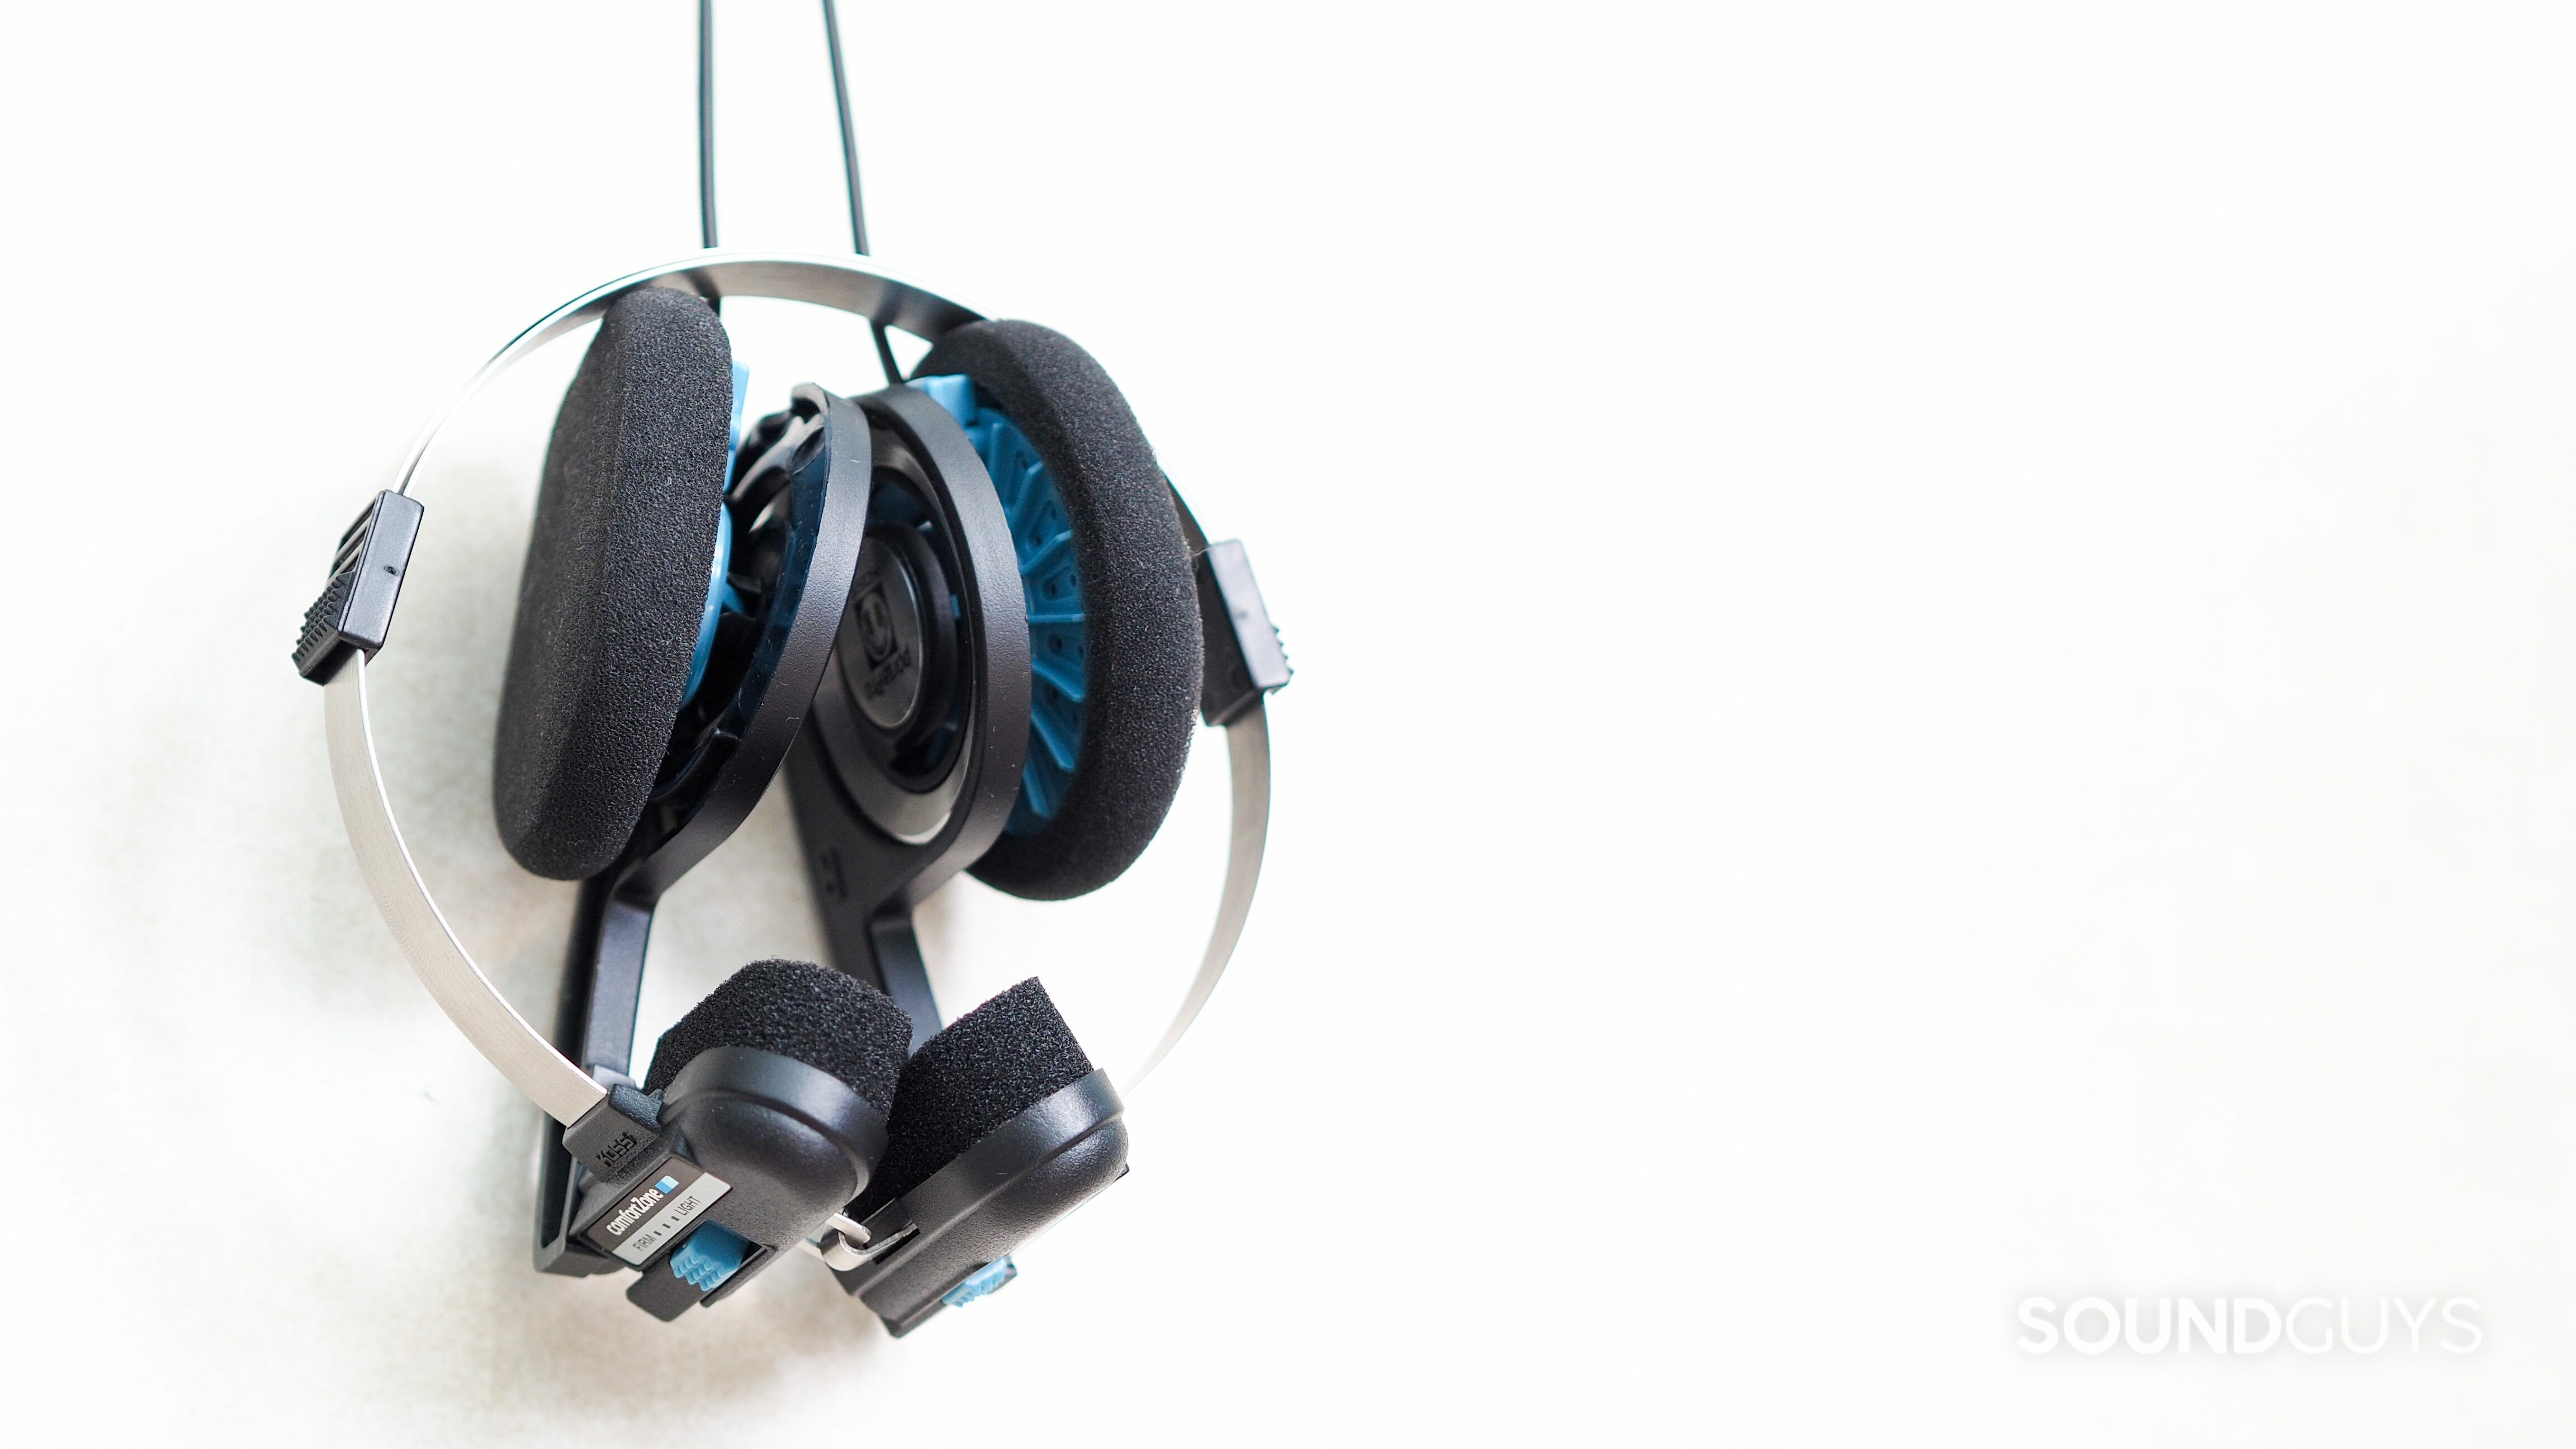 The Koss Porta Pro semi-open headphones dangling from the wires.